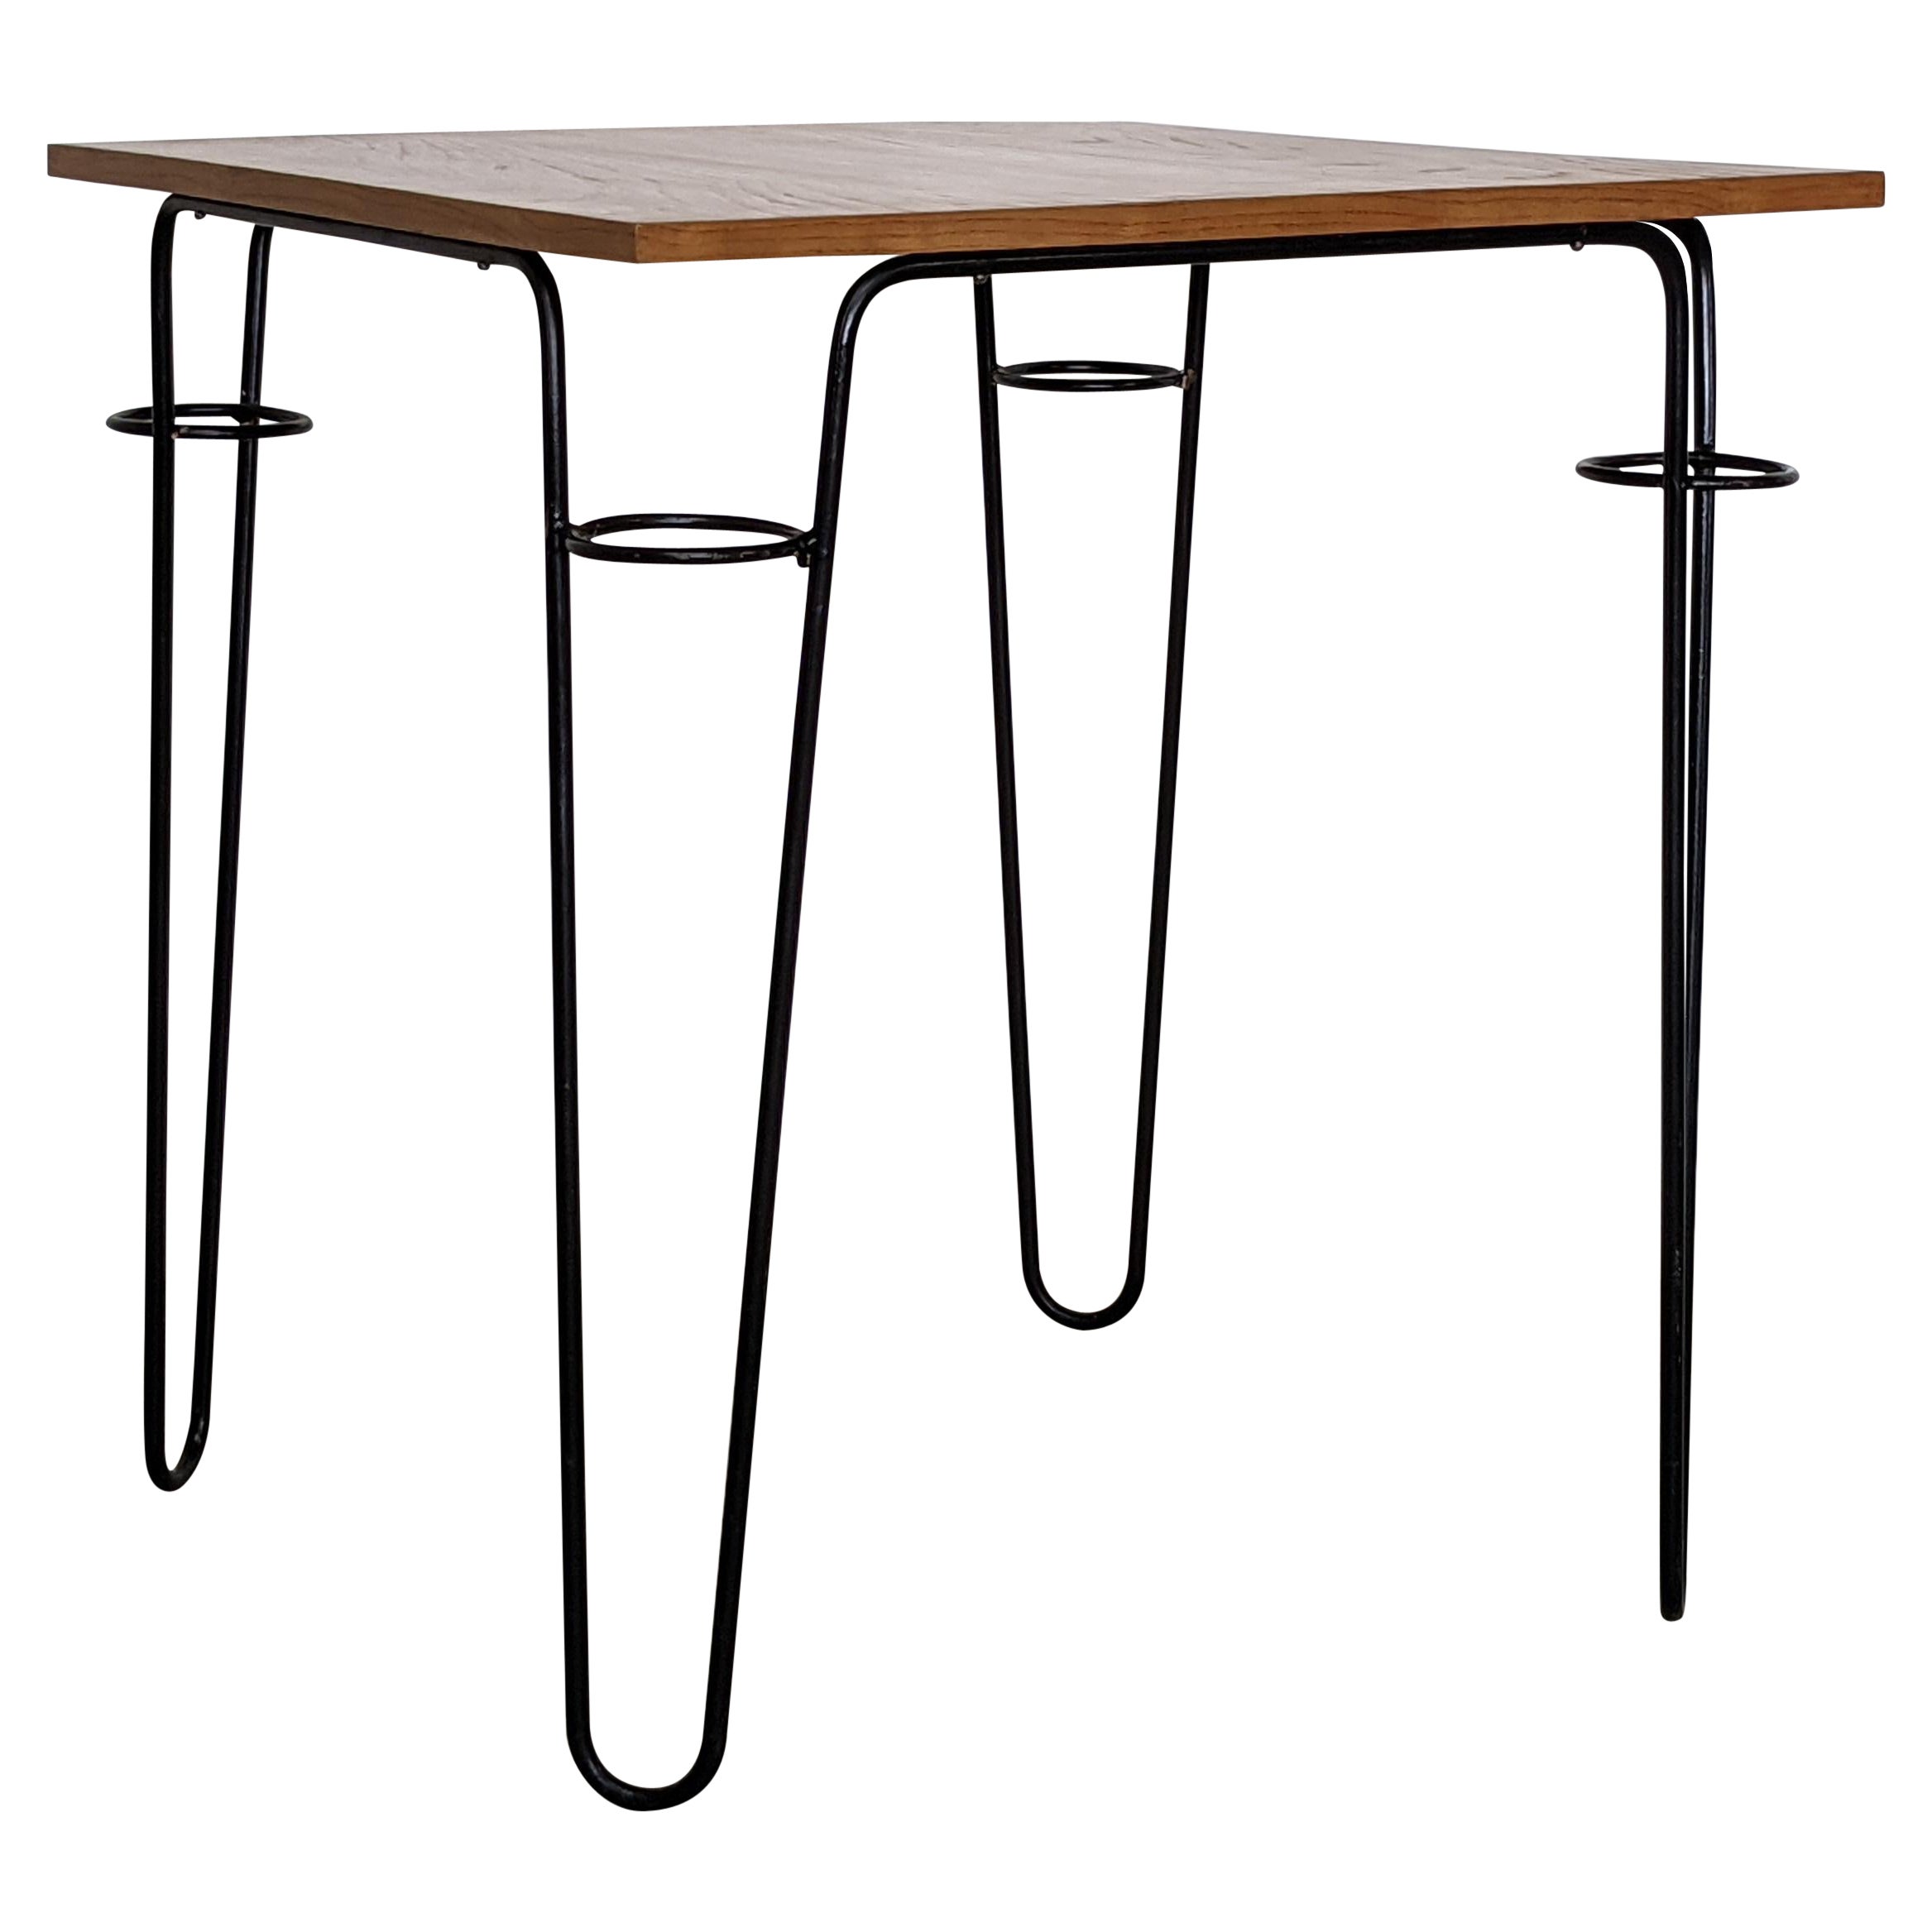 Raoul Guys Square Table in Lacquered Metal and Ash Wood Veneer, France 1950s For Sale